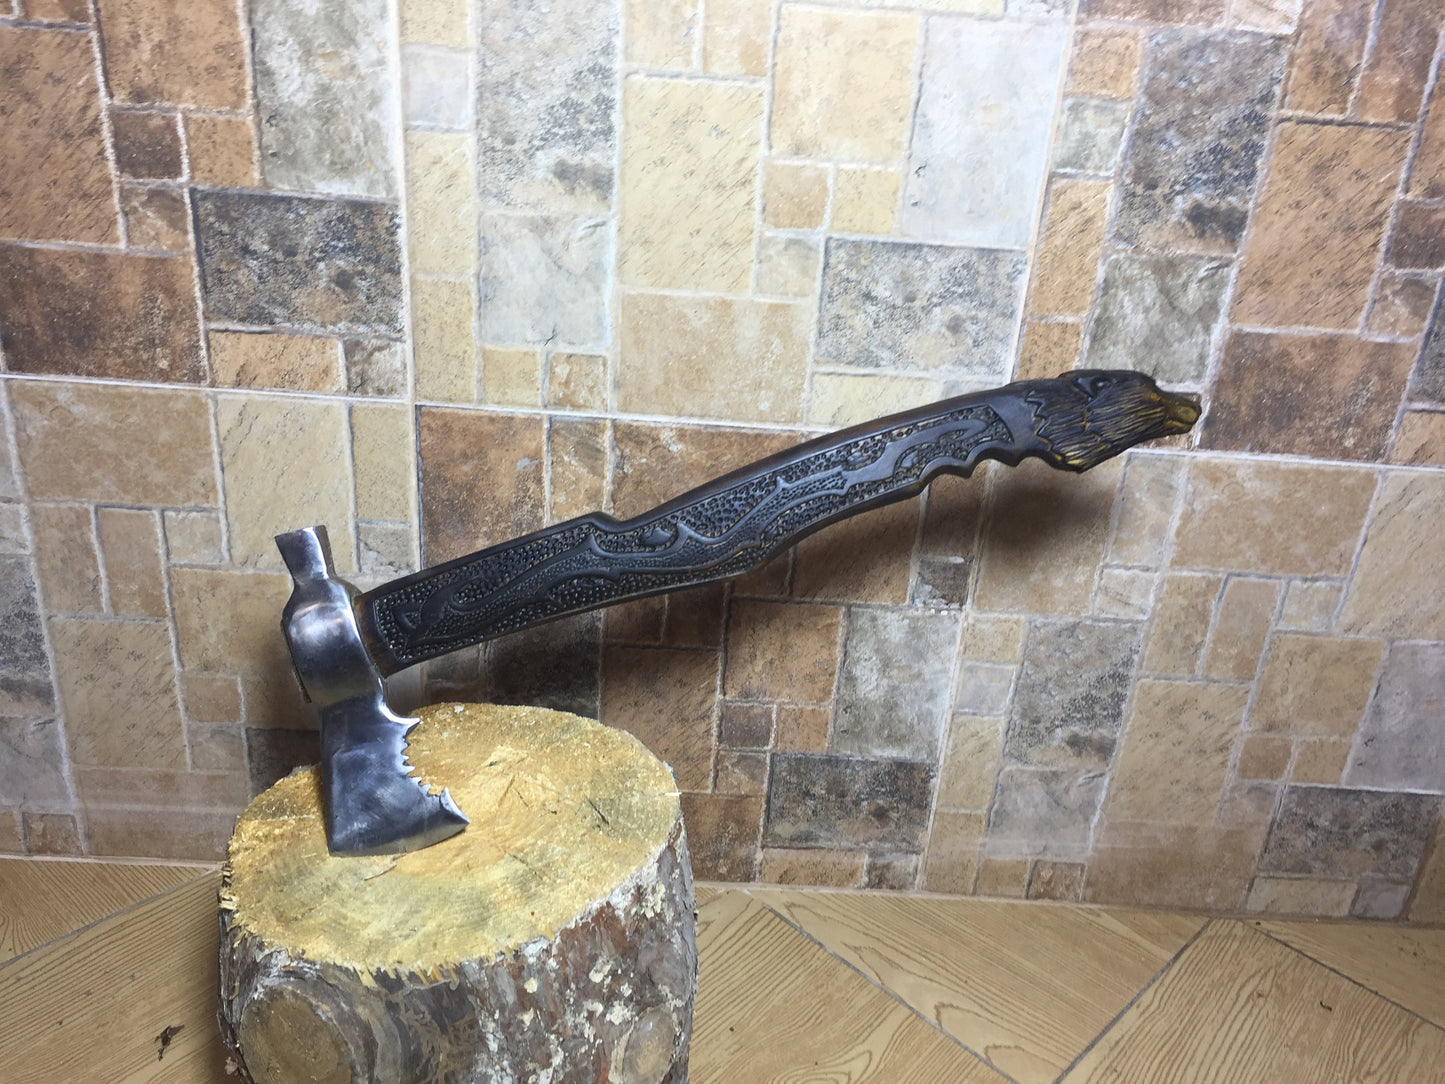 Medieval axe, viking axe, iron gift for him, tomahawk, hatchet, hiking, hunting, mens gifts, chopping axe, gifts for men, manly iron gifts